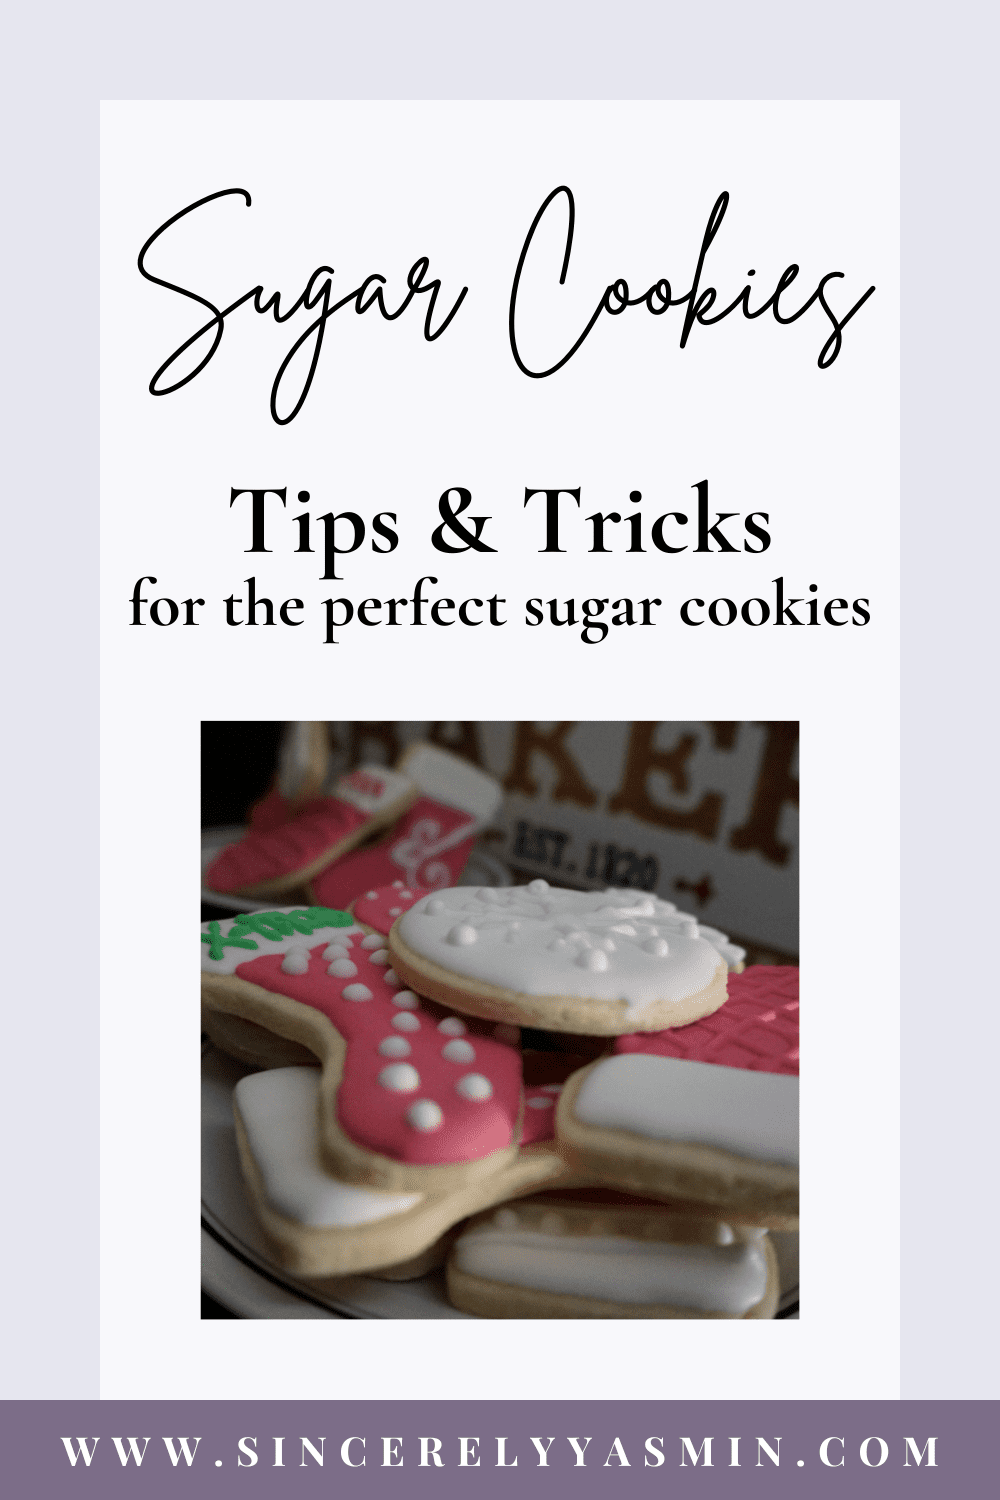 Everything You Need to Decorate Sugar Cookies